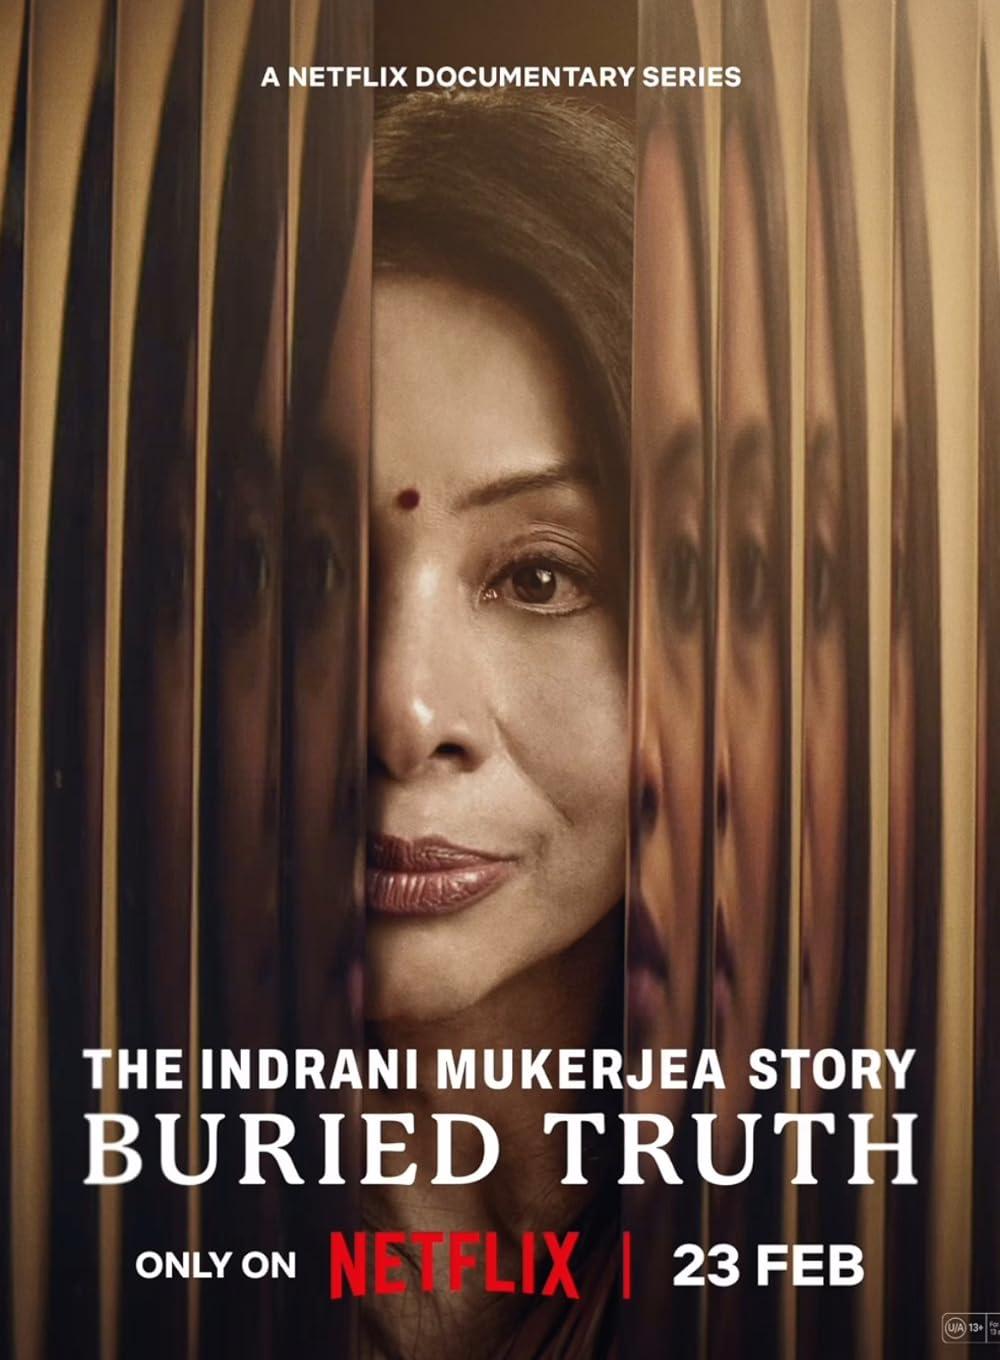 The Indrani Mukerjea Story: Buried Truth (February 23) - Streaming on NetflixThe Indrani Mukerjea Story: Buried Truth is a docuseries that delves into the chilling 2015 case of Indrani Mukerjea, arrested for the murder of her daughter, Sheena Bora. The series unravels sensational family secrets and explores the alleged financial motives behind the crime, featuring unsettling call recordings and previously unseen images to offer a comprehensive look into this complex case. It also features an interview with Mukerjea herself.